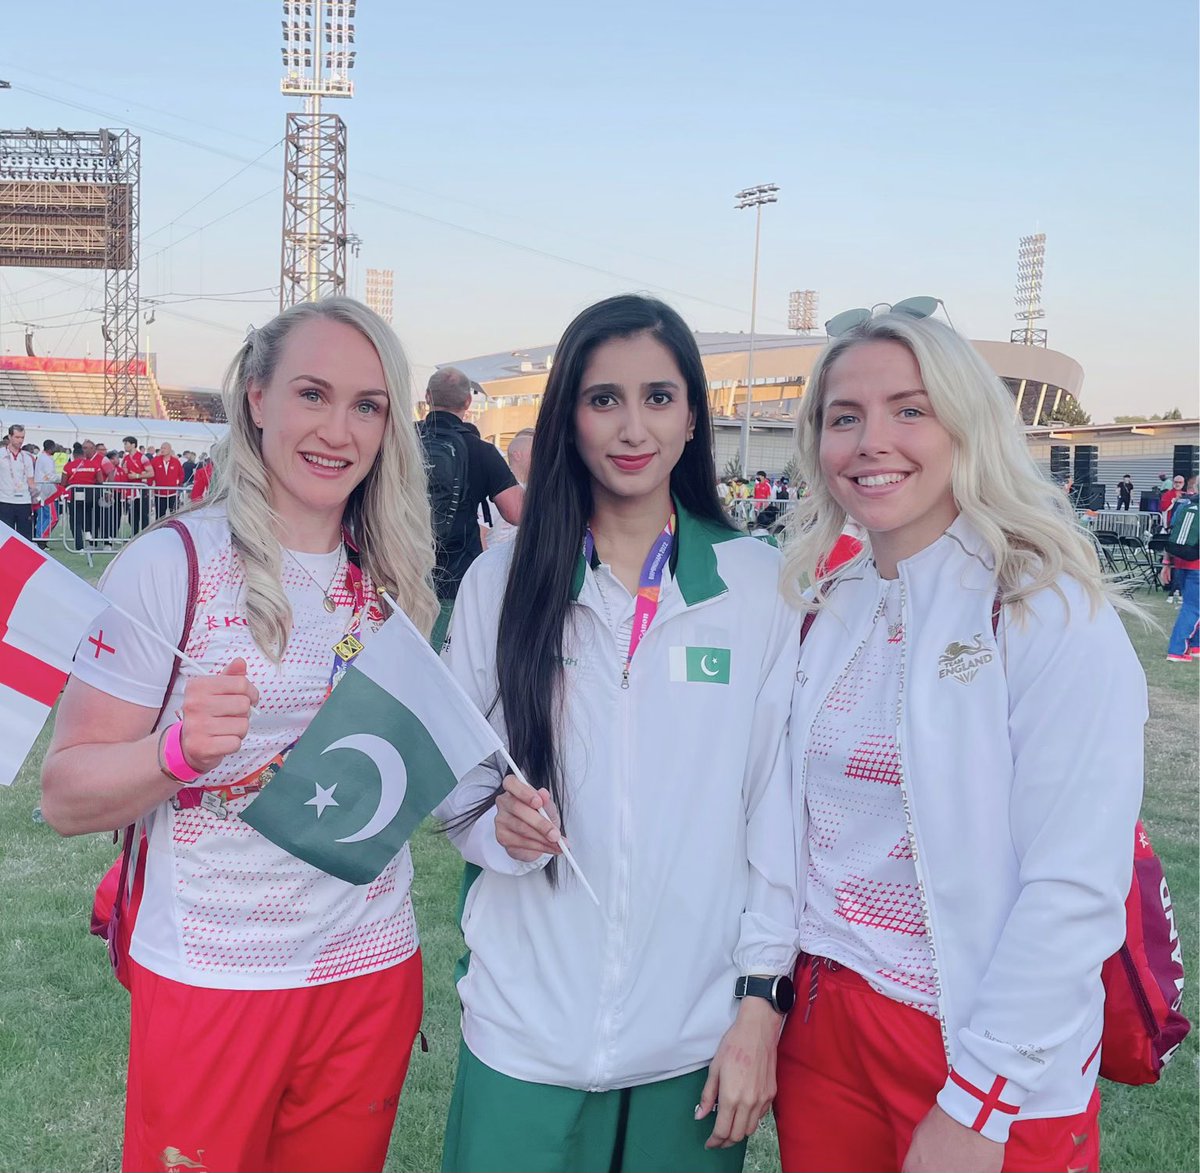 Pakistan 🇵🇰 with England 🏴󠁧󠁢󠁥󠁮󠁧󠁿 on the closing ceremony of Birmingham Commonwealth Games 2022.

#Throwback 
#B2022
#CommonwealthGames2022 
#Birmingham
#England 
#PakistanZindabad 🇵🇰
#ProudPakistani🇵🇰